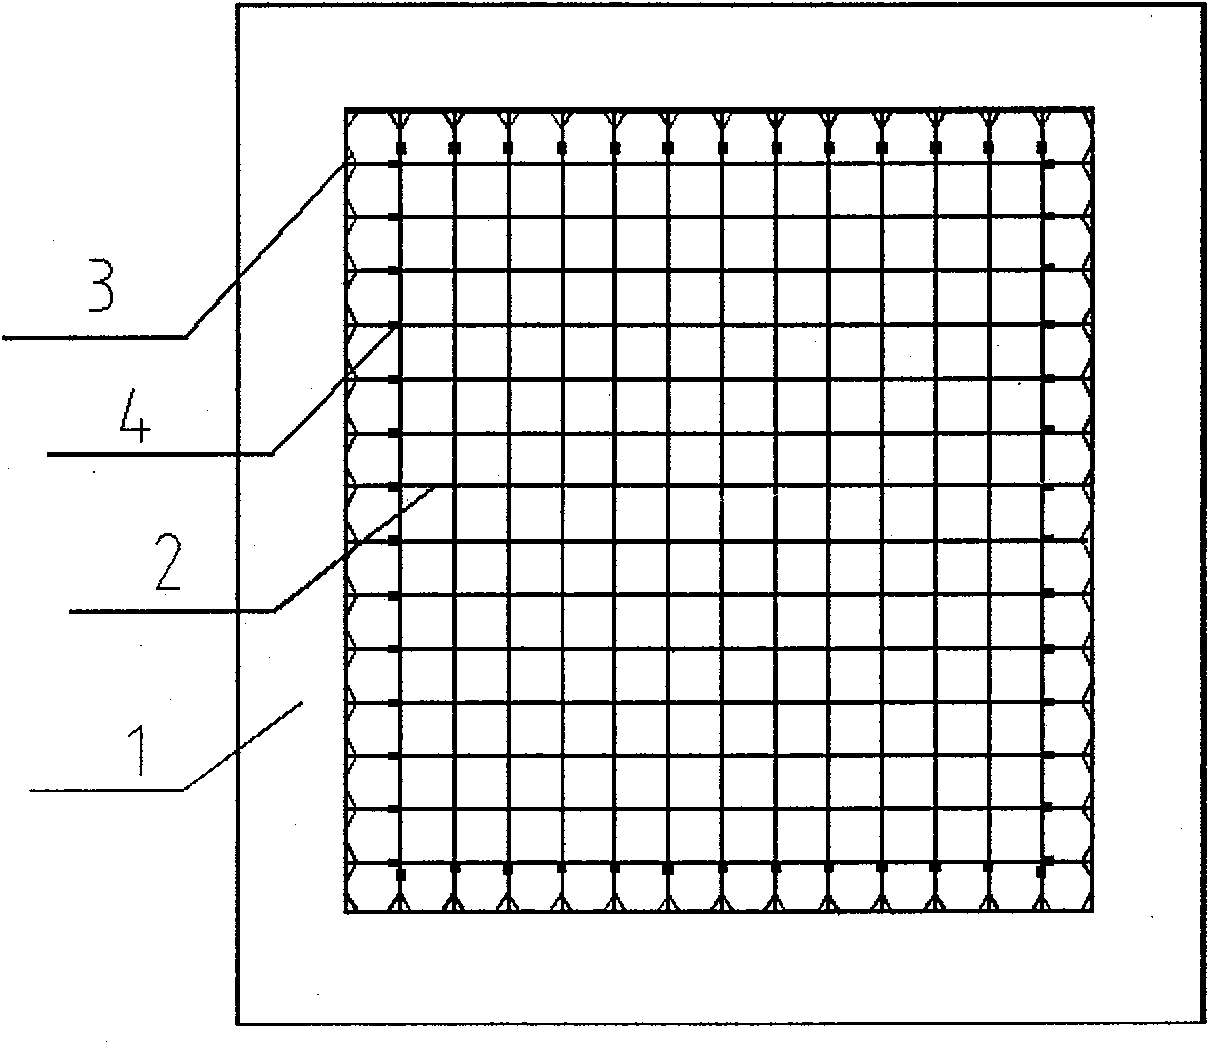 Foundation pit support and construction method for cement mixing pile inserted with Y type precast pile